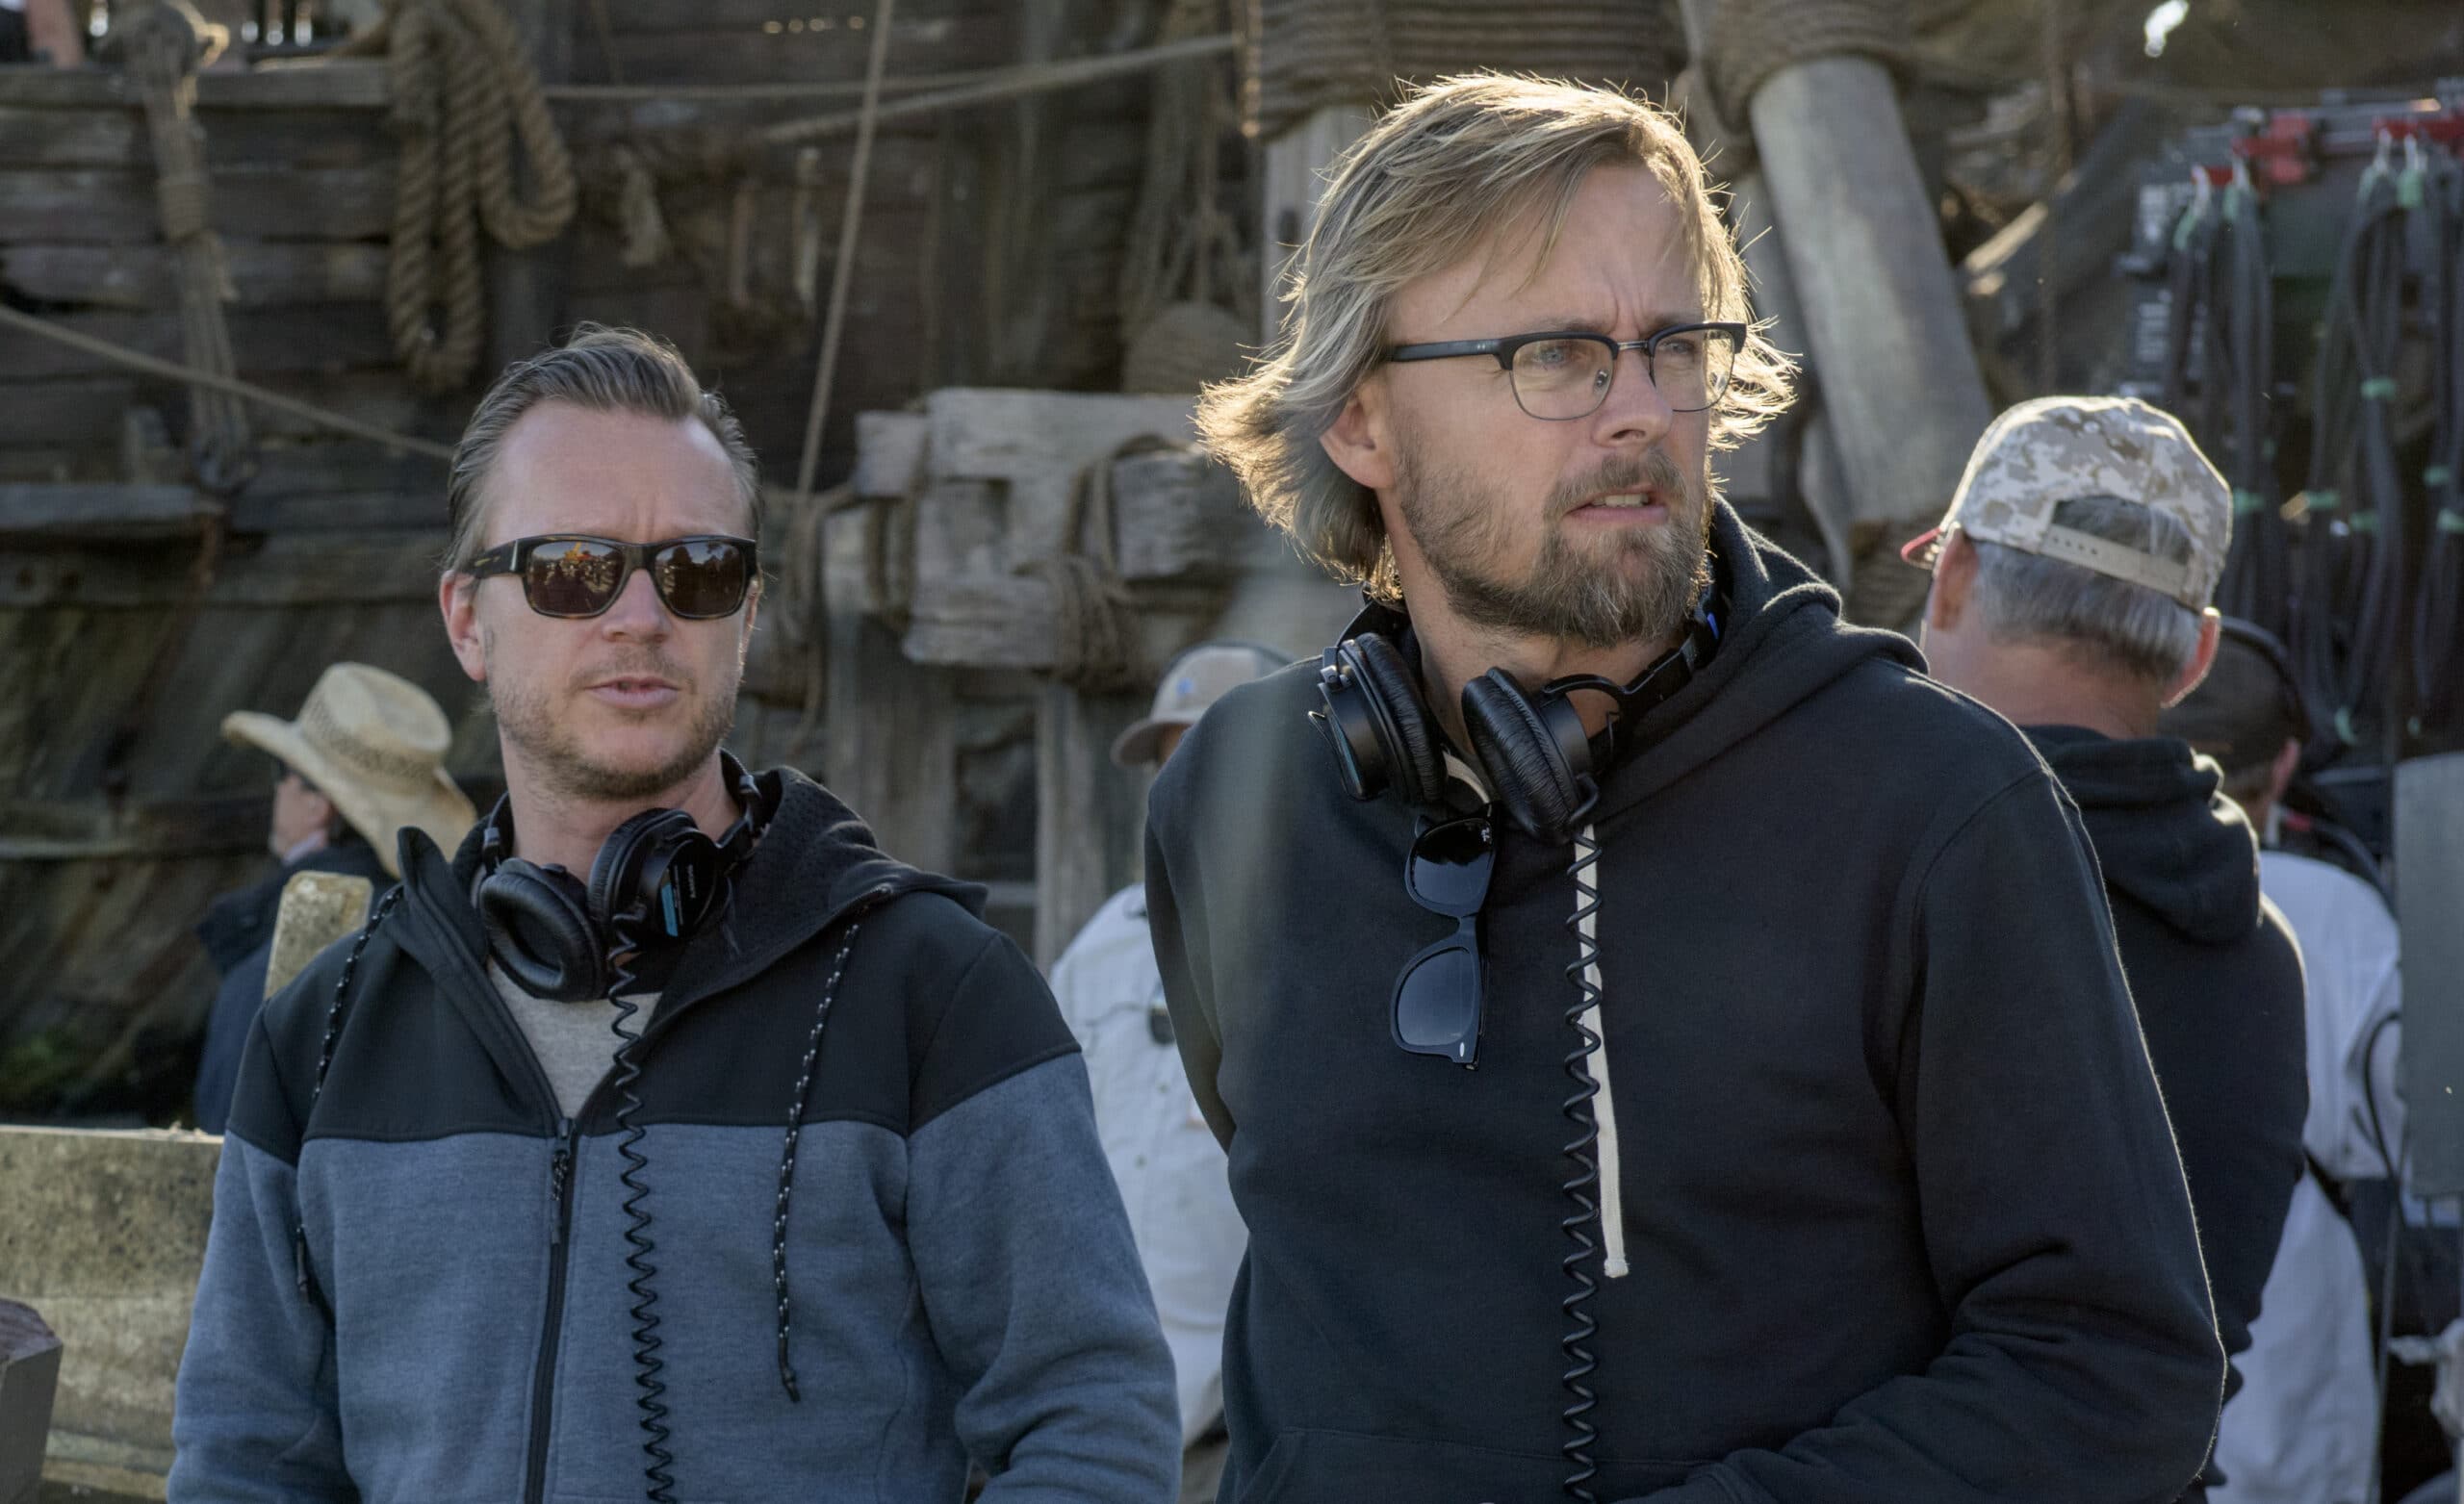 Exclusive Interview with Directors Joachim Ronning & Espen Sandberg – Pirates Of The Caribbean: Dead Men Tell No Tales #PiratesLifeEvent #PiratesOfTheCaribbean